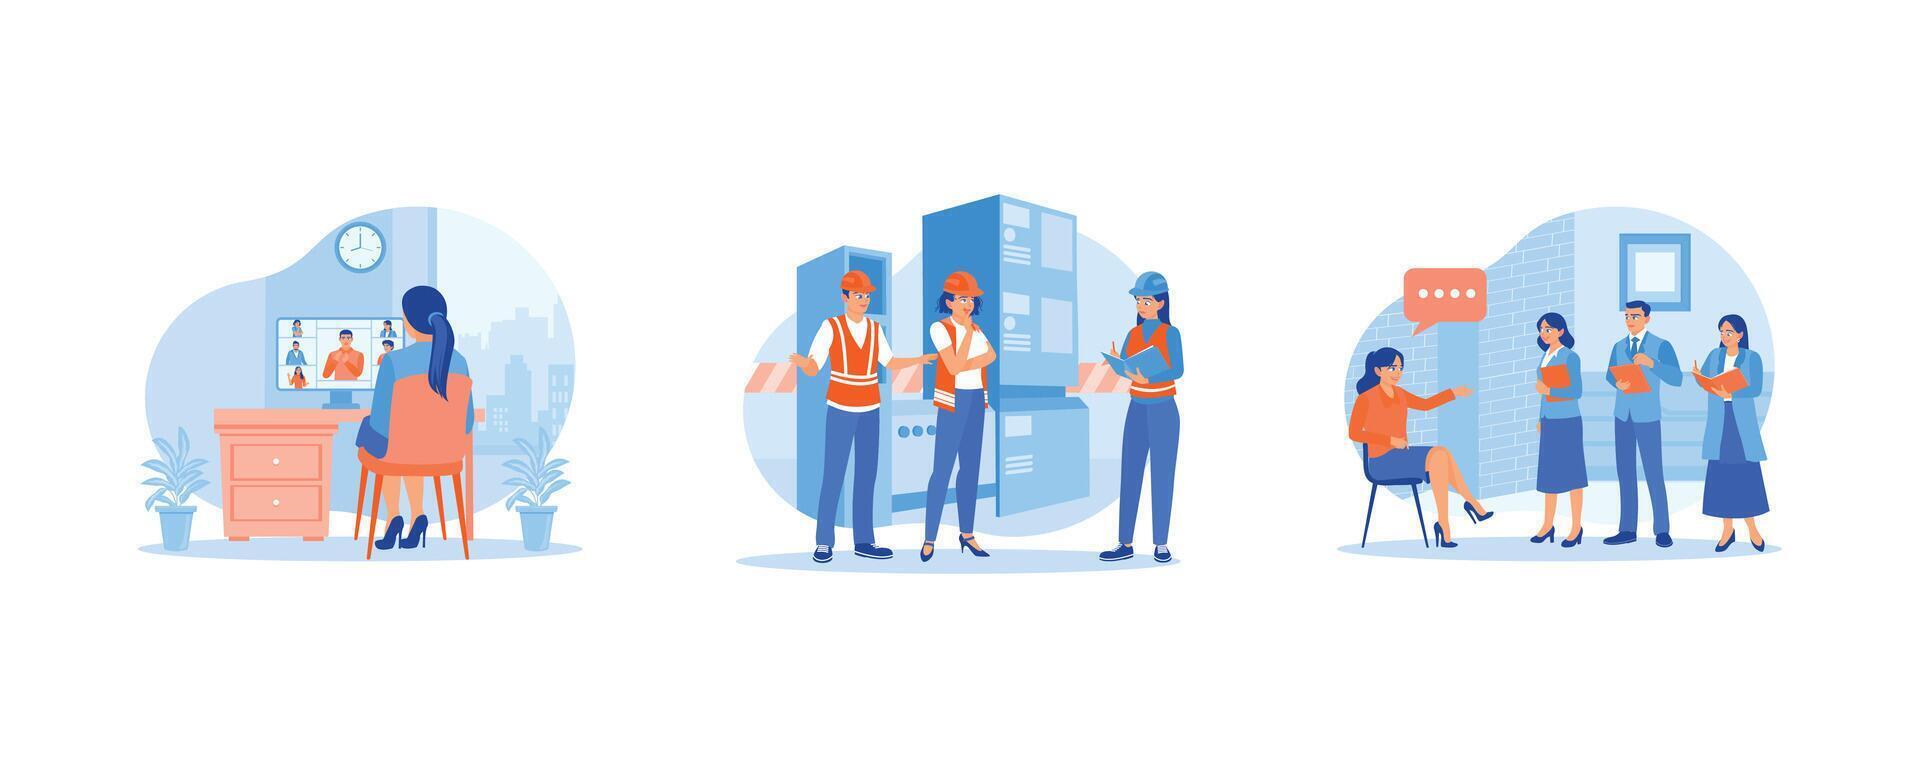 Briefing concept. Video calls with colleagues. Briefing at a heavy industrial manufacturing site. Listen to and take notes from company leaders. set flat vector modern illustration